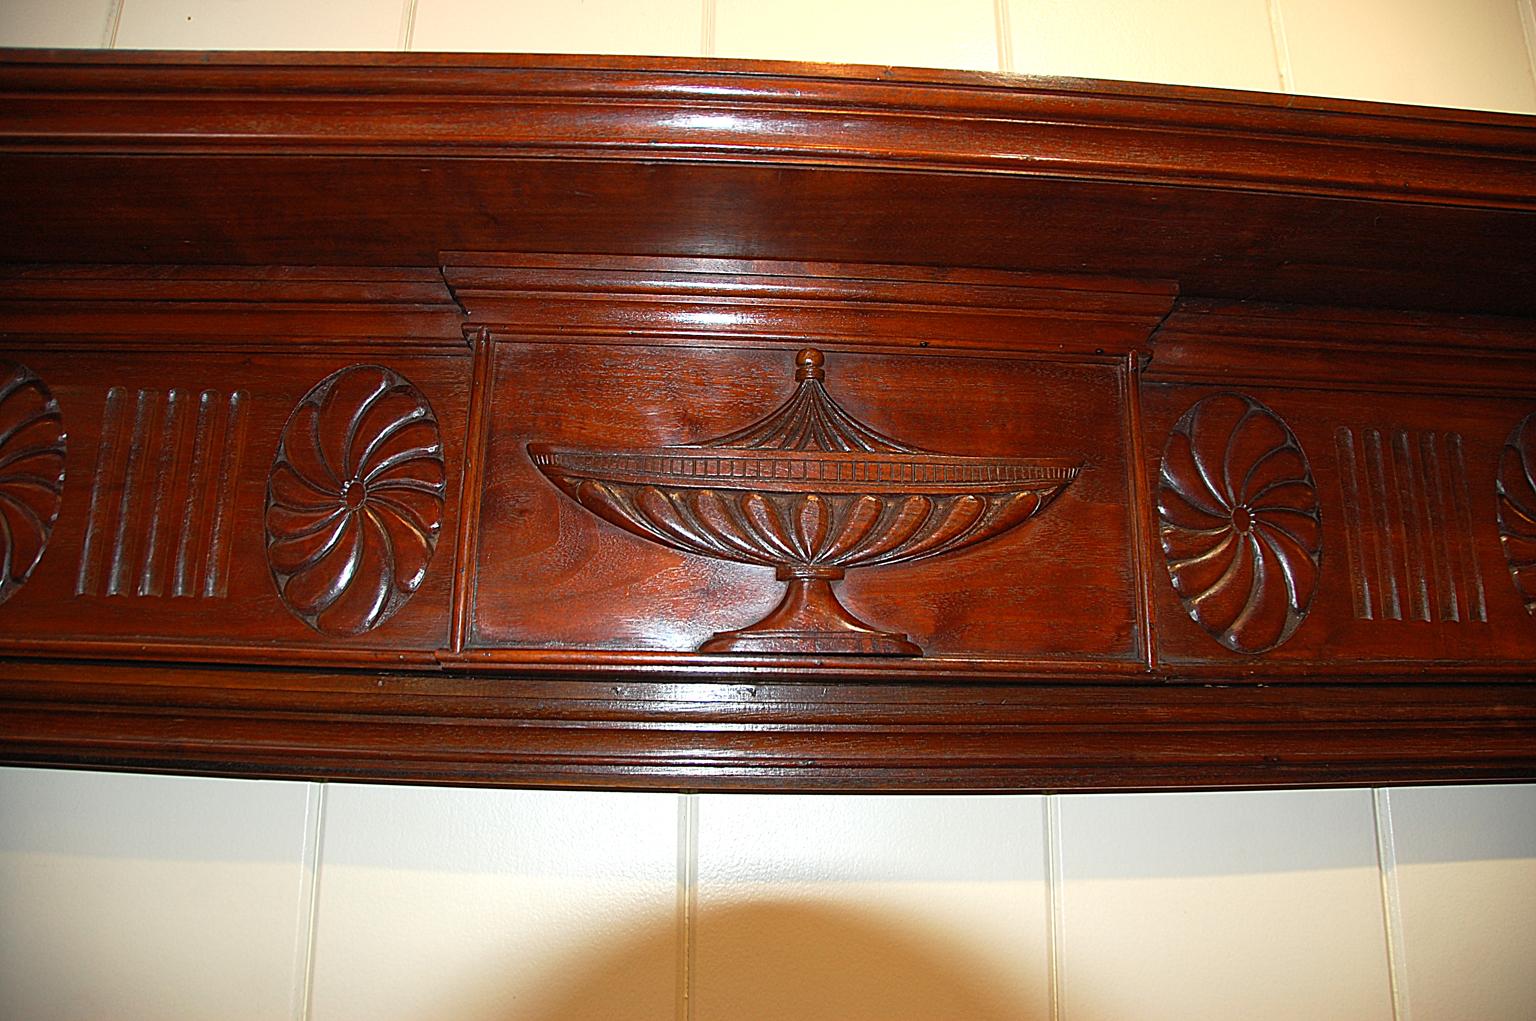 English Adam style 19th century carved mahogany fireplace surround and mantel. This elegant hand carved fireplace surround has a central urn motif with stylized flowers and anthemions framing it. The carved reeded columns surmounted by urns enhance